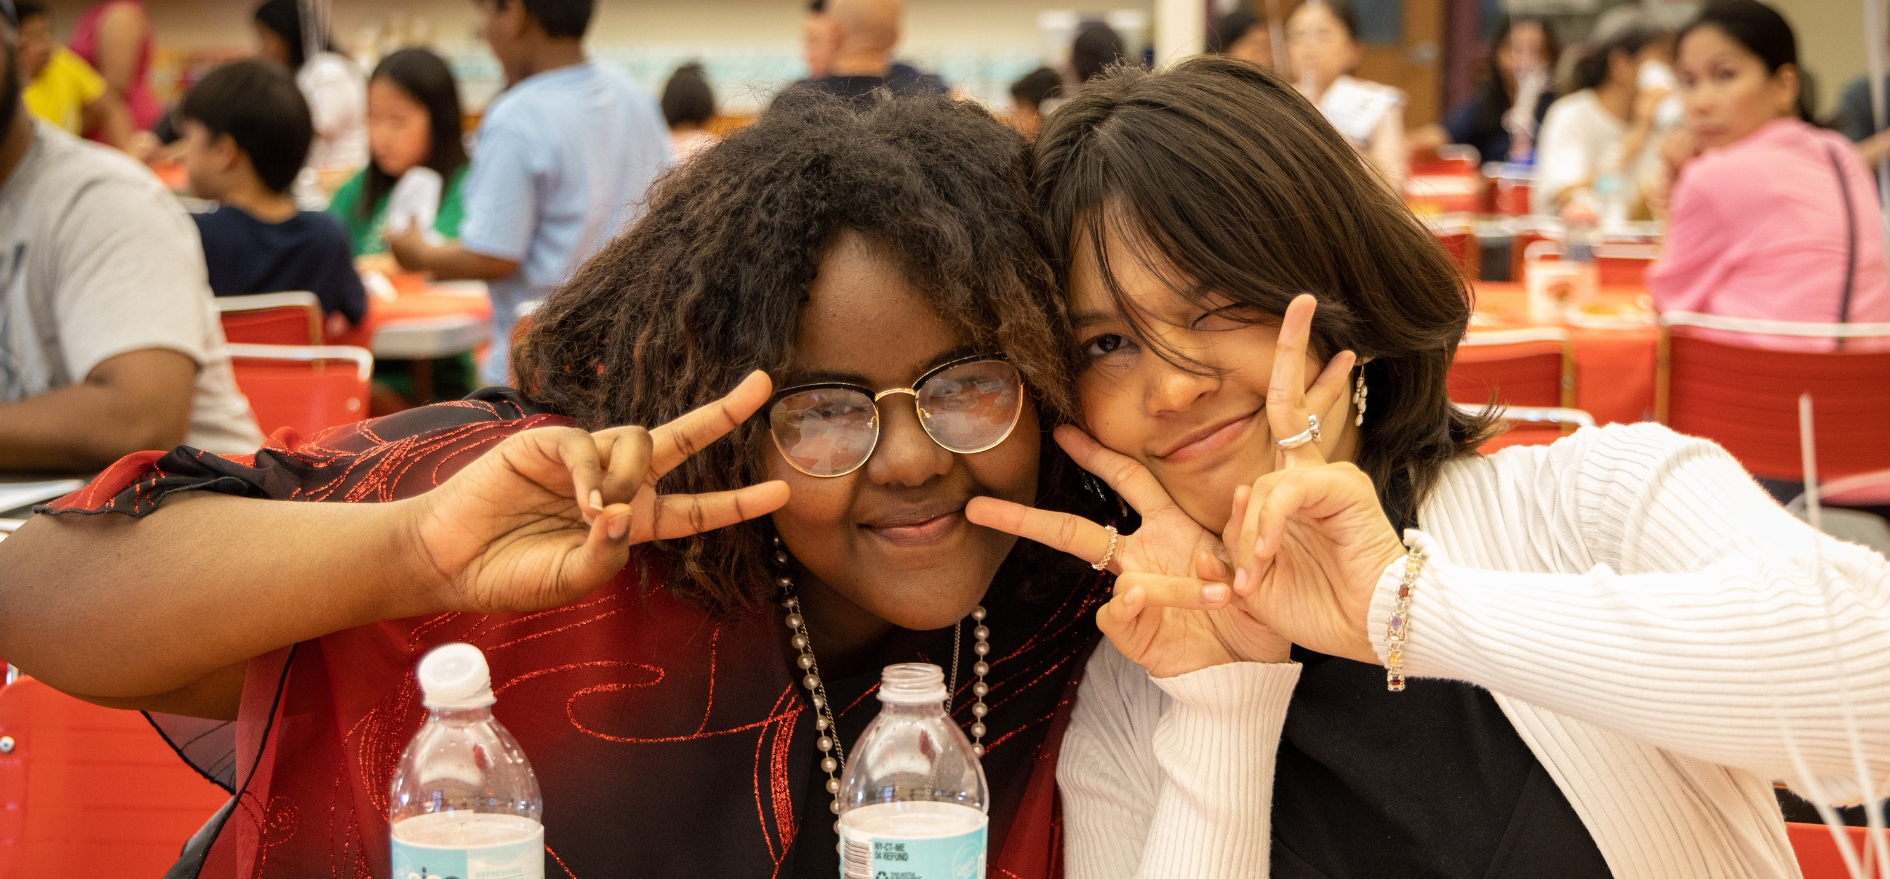 Two students make peace signs and smile while sitting at the dinner table at ENL Extravaganza